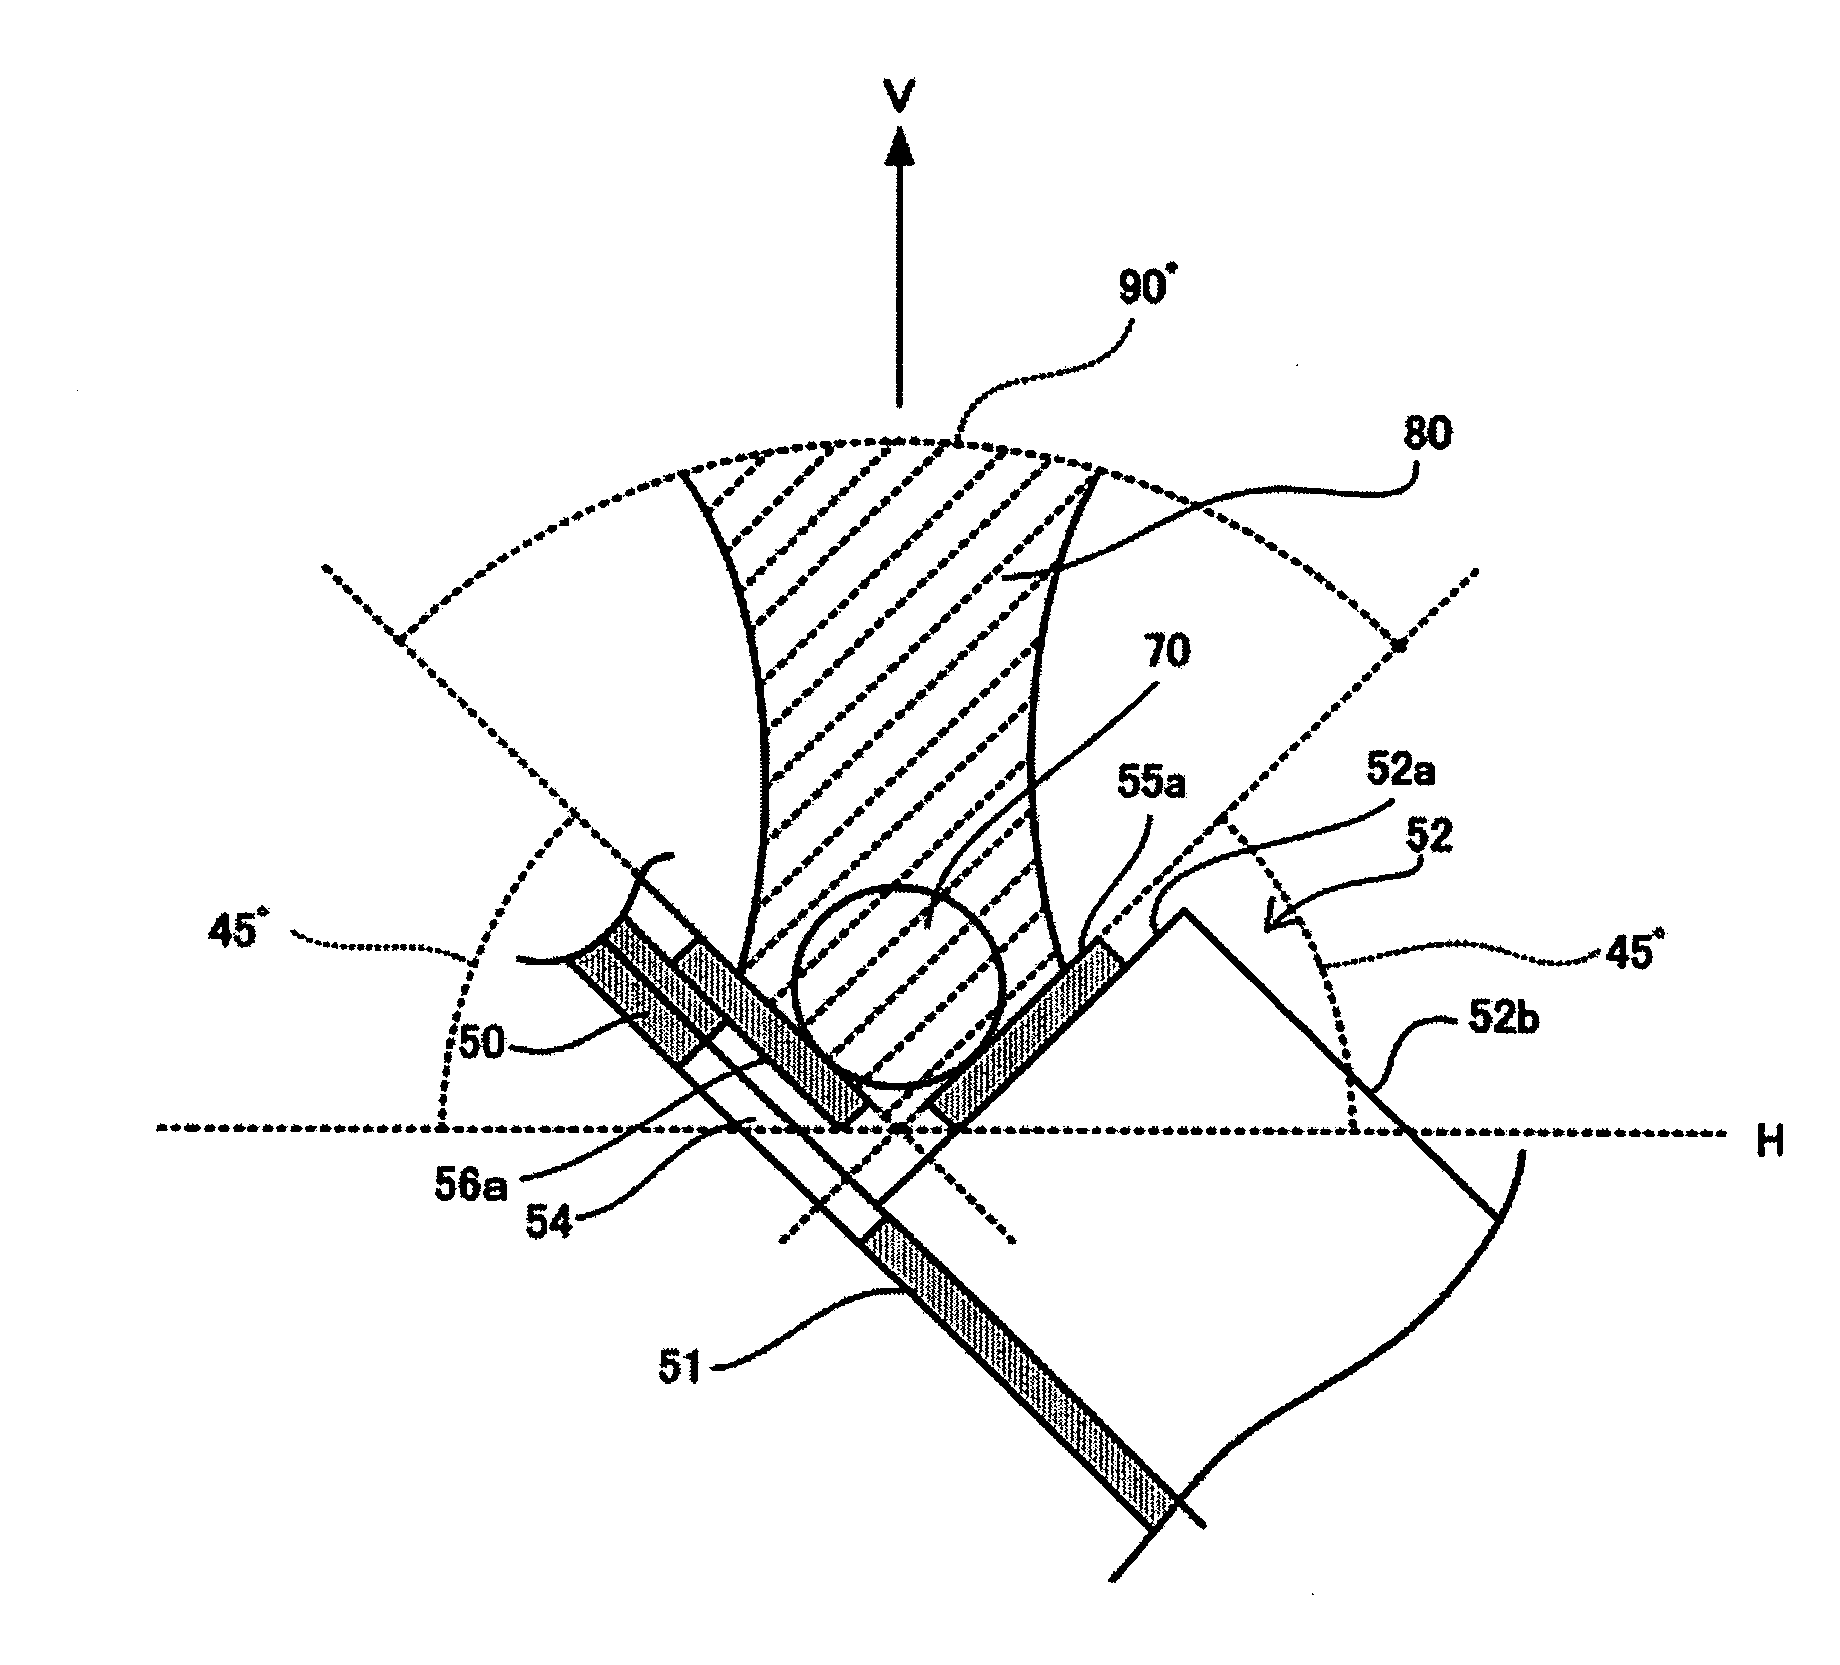 Head gimbal assembly and magnetic disk drive with solder ball connection